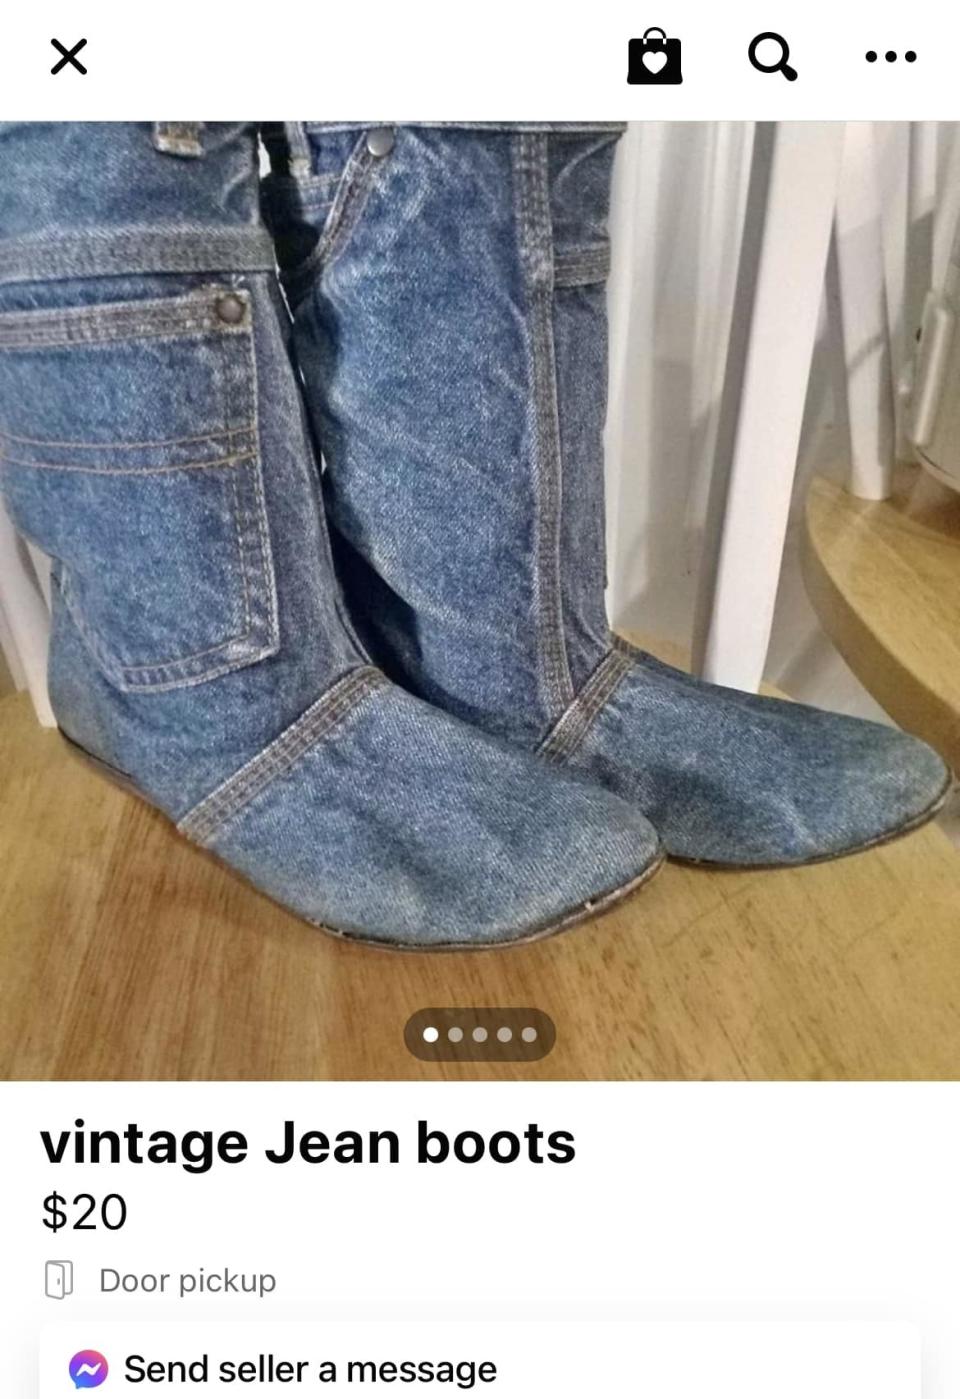 Vintage jean boots for sale for $20